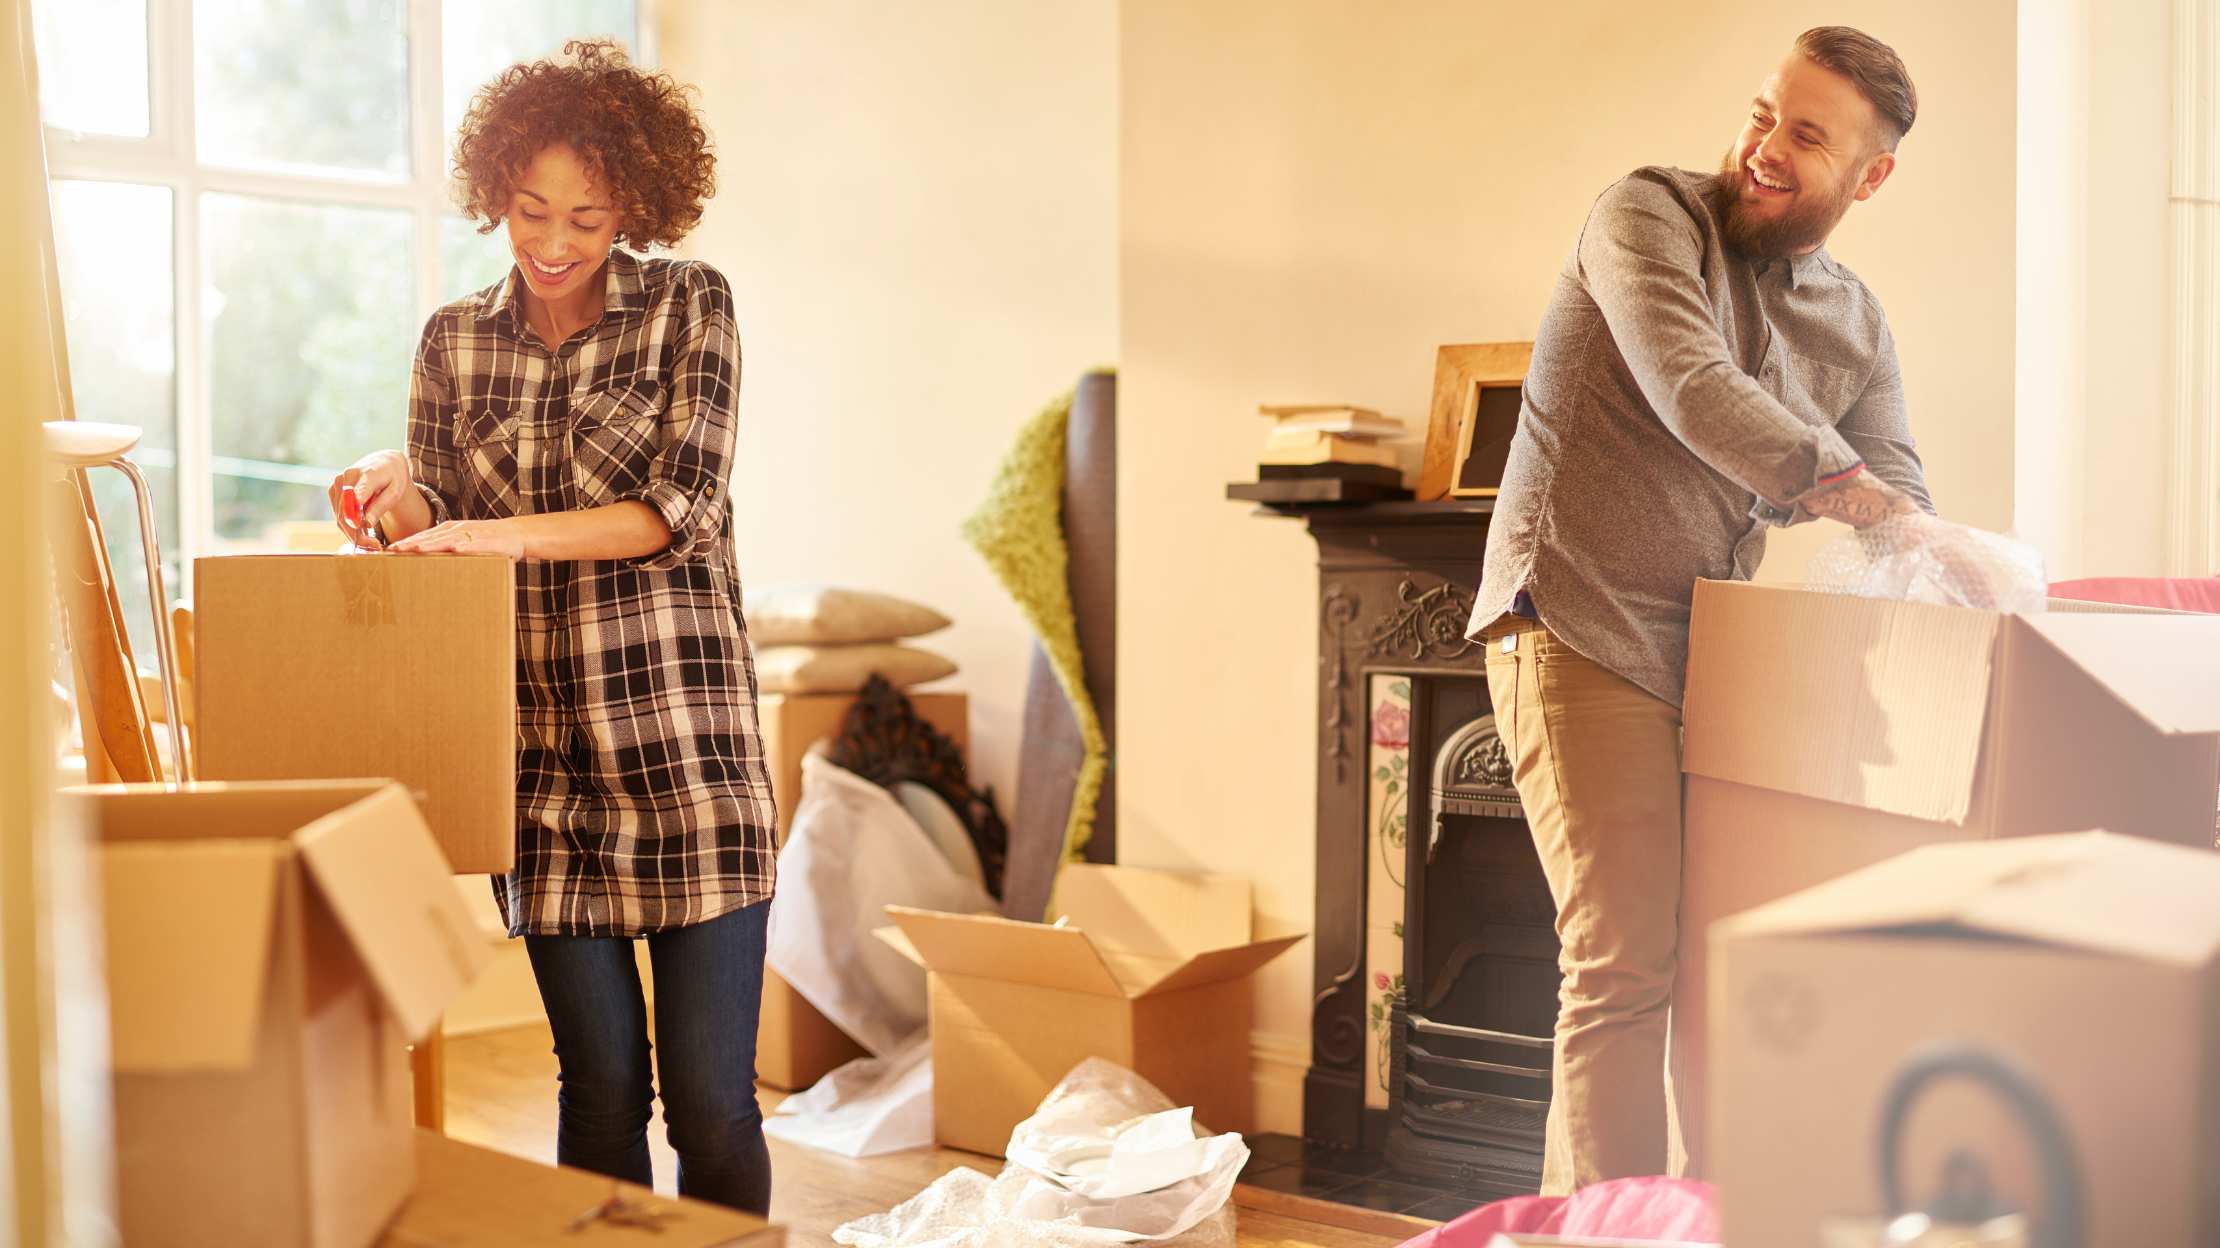 Five things to do on your first day in your new home.